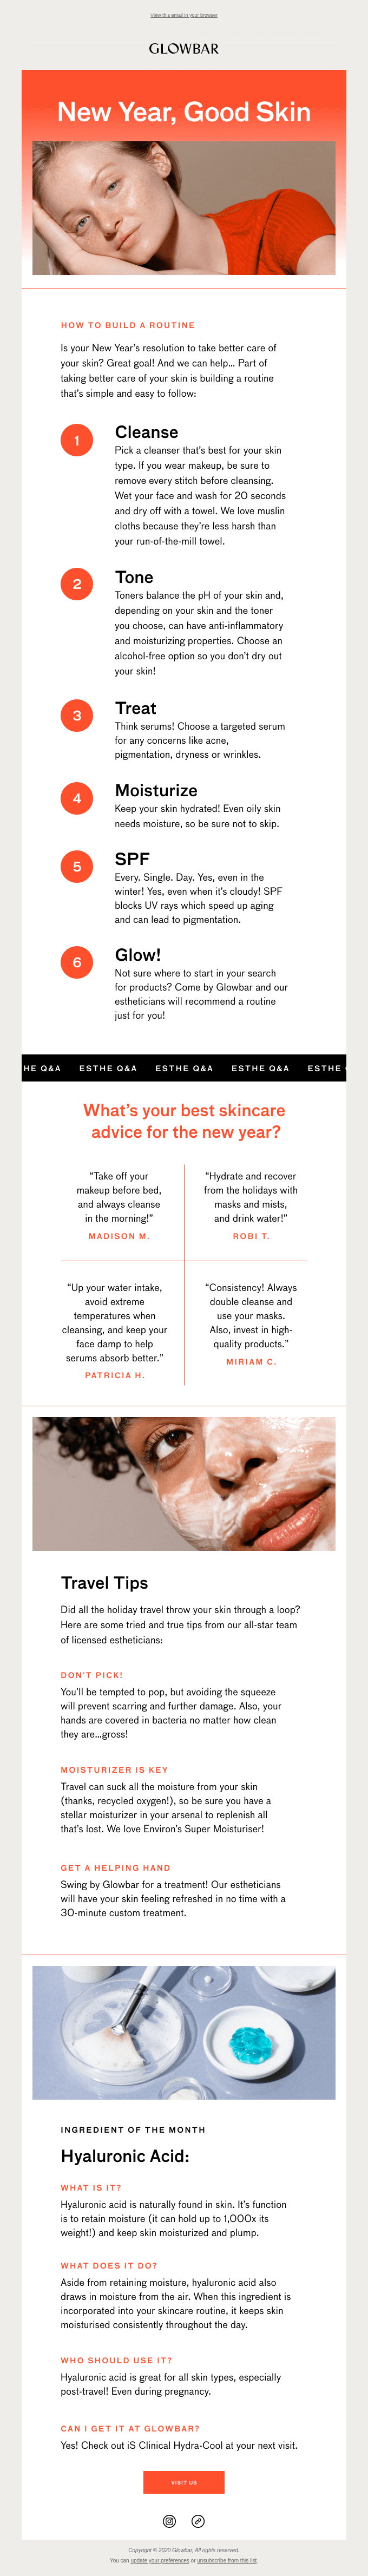 Resolving to take better care of your skin? ✨